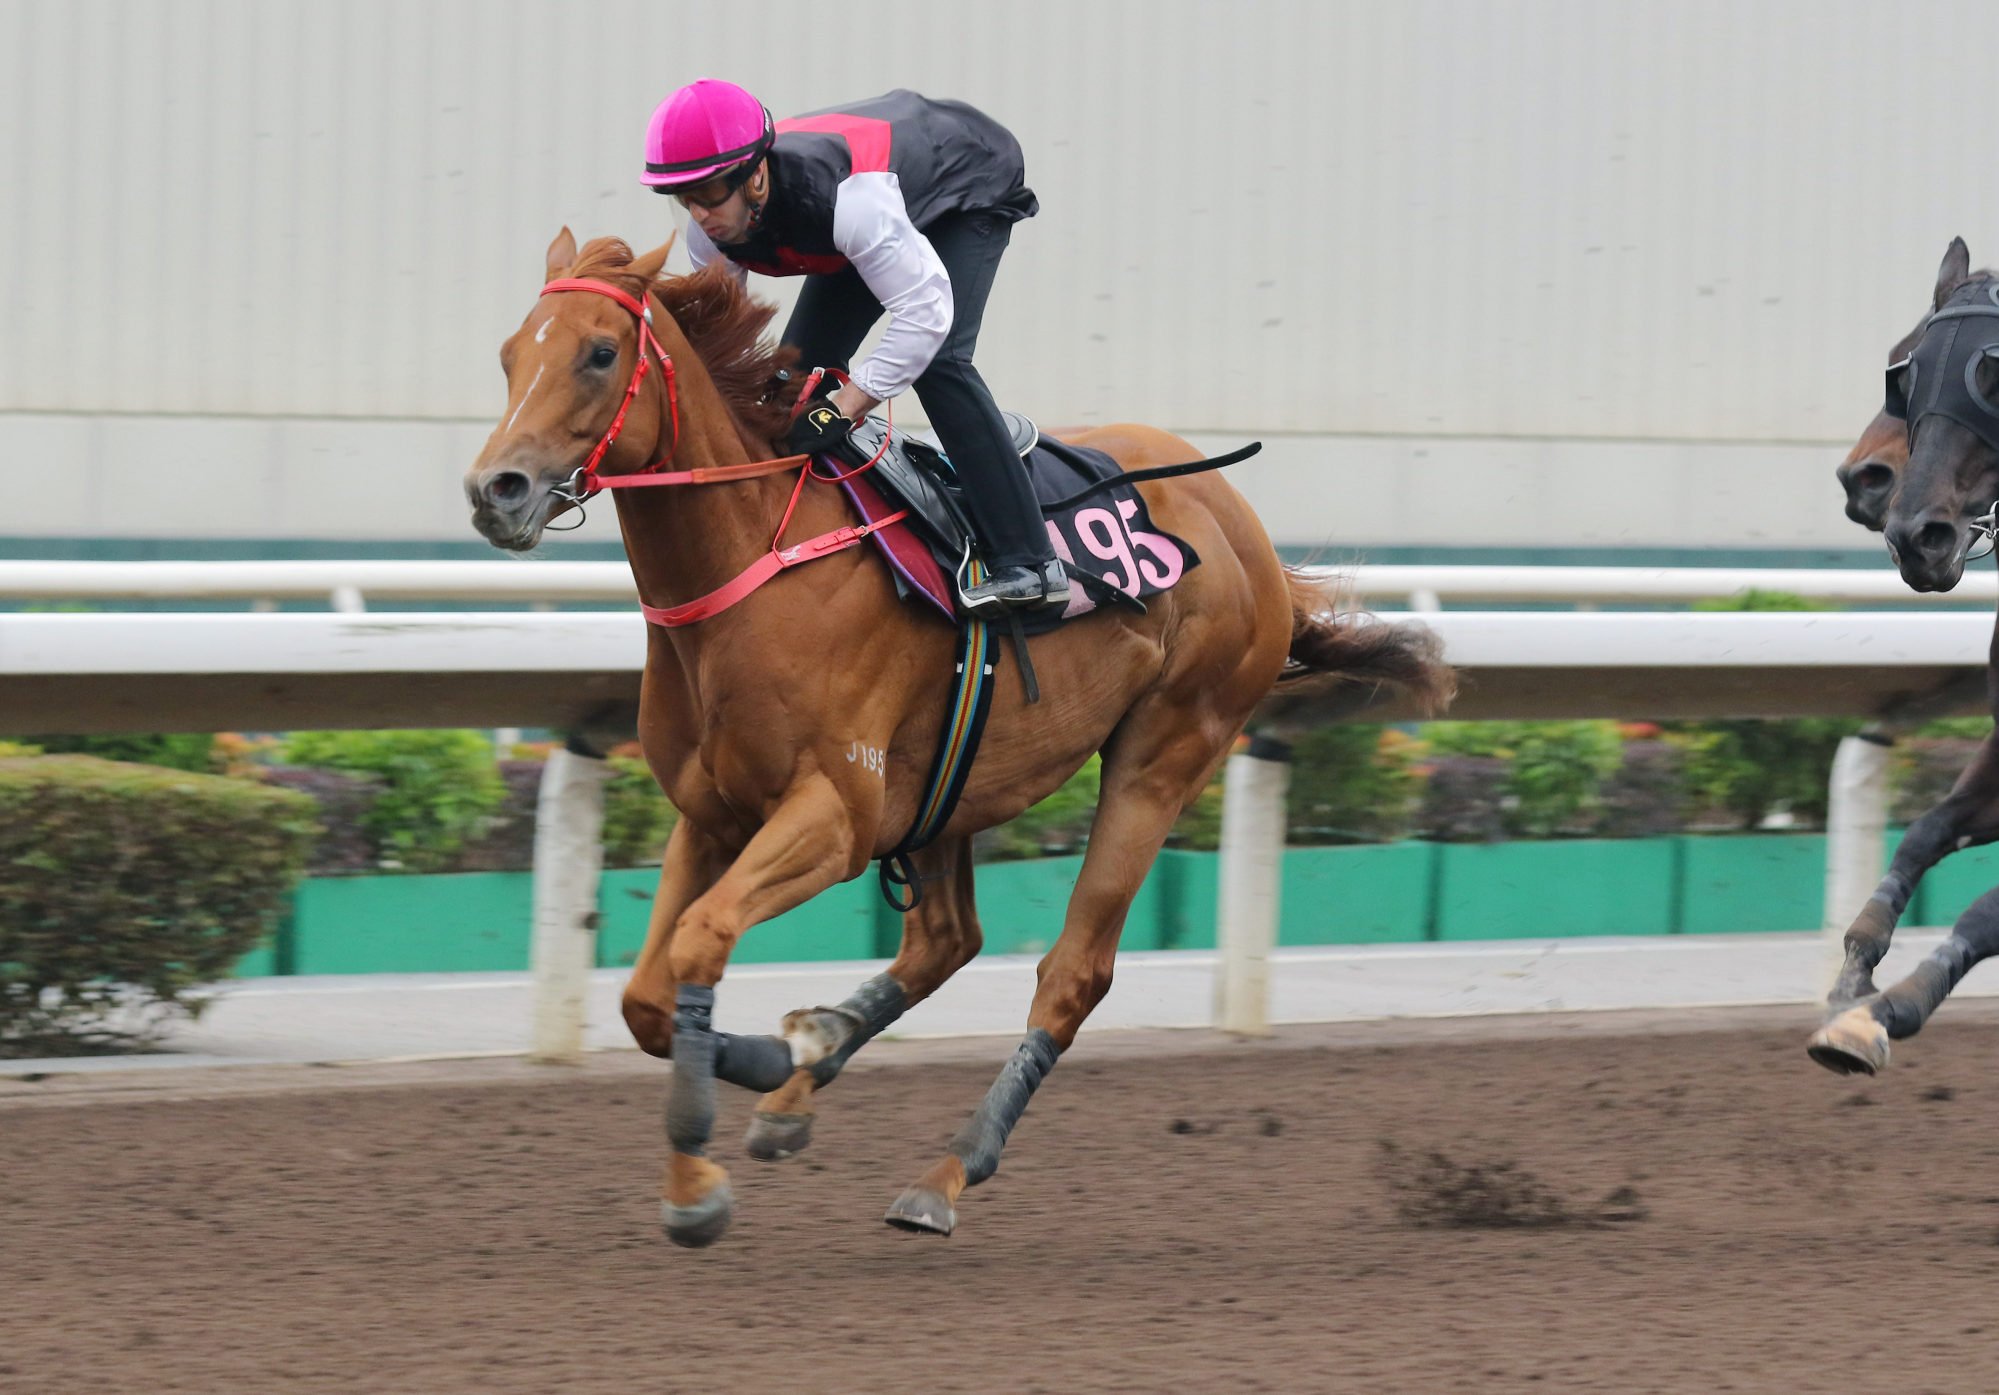 Young Champion trials at Sha Tin earlier this month.